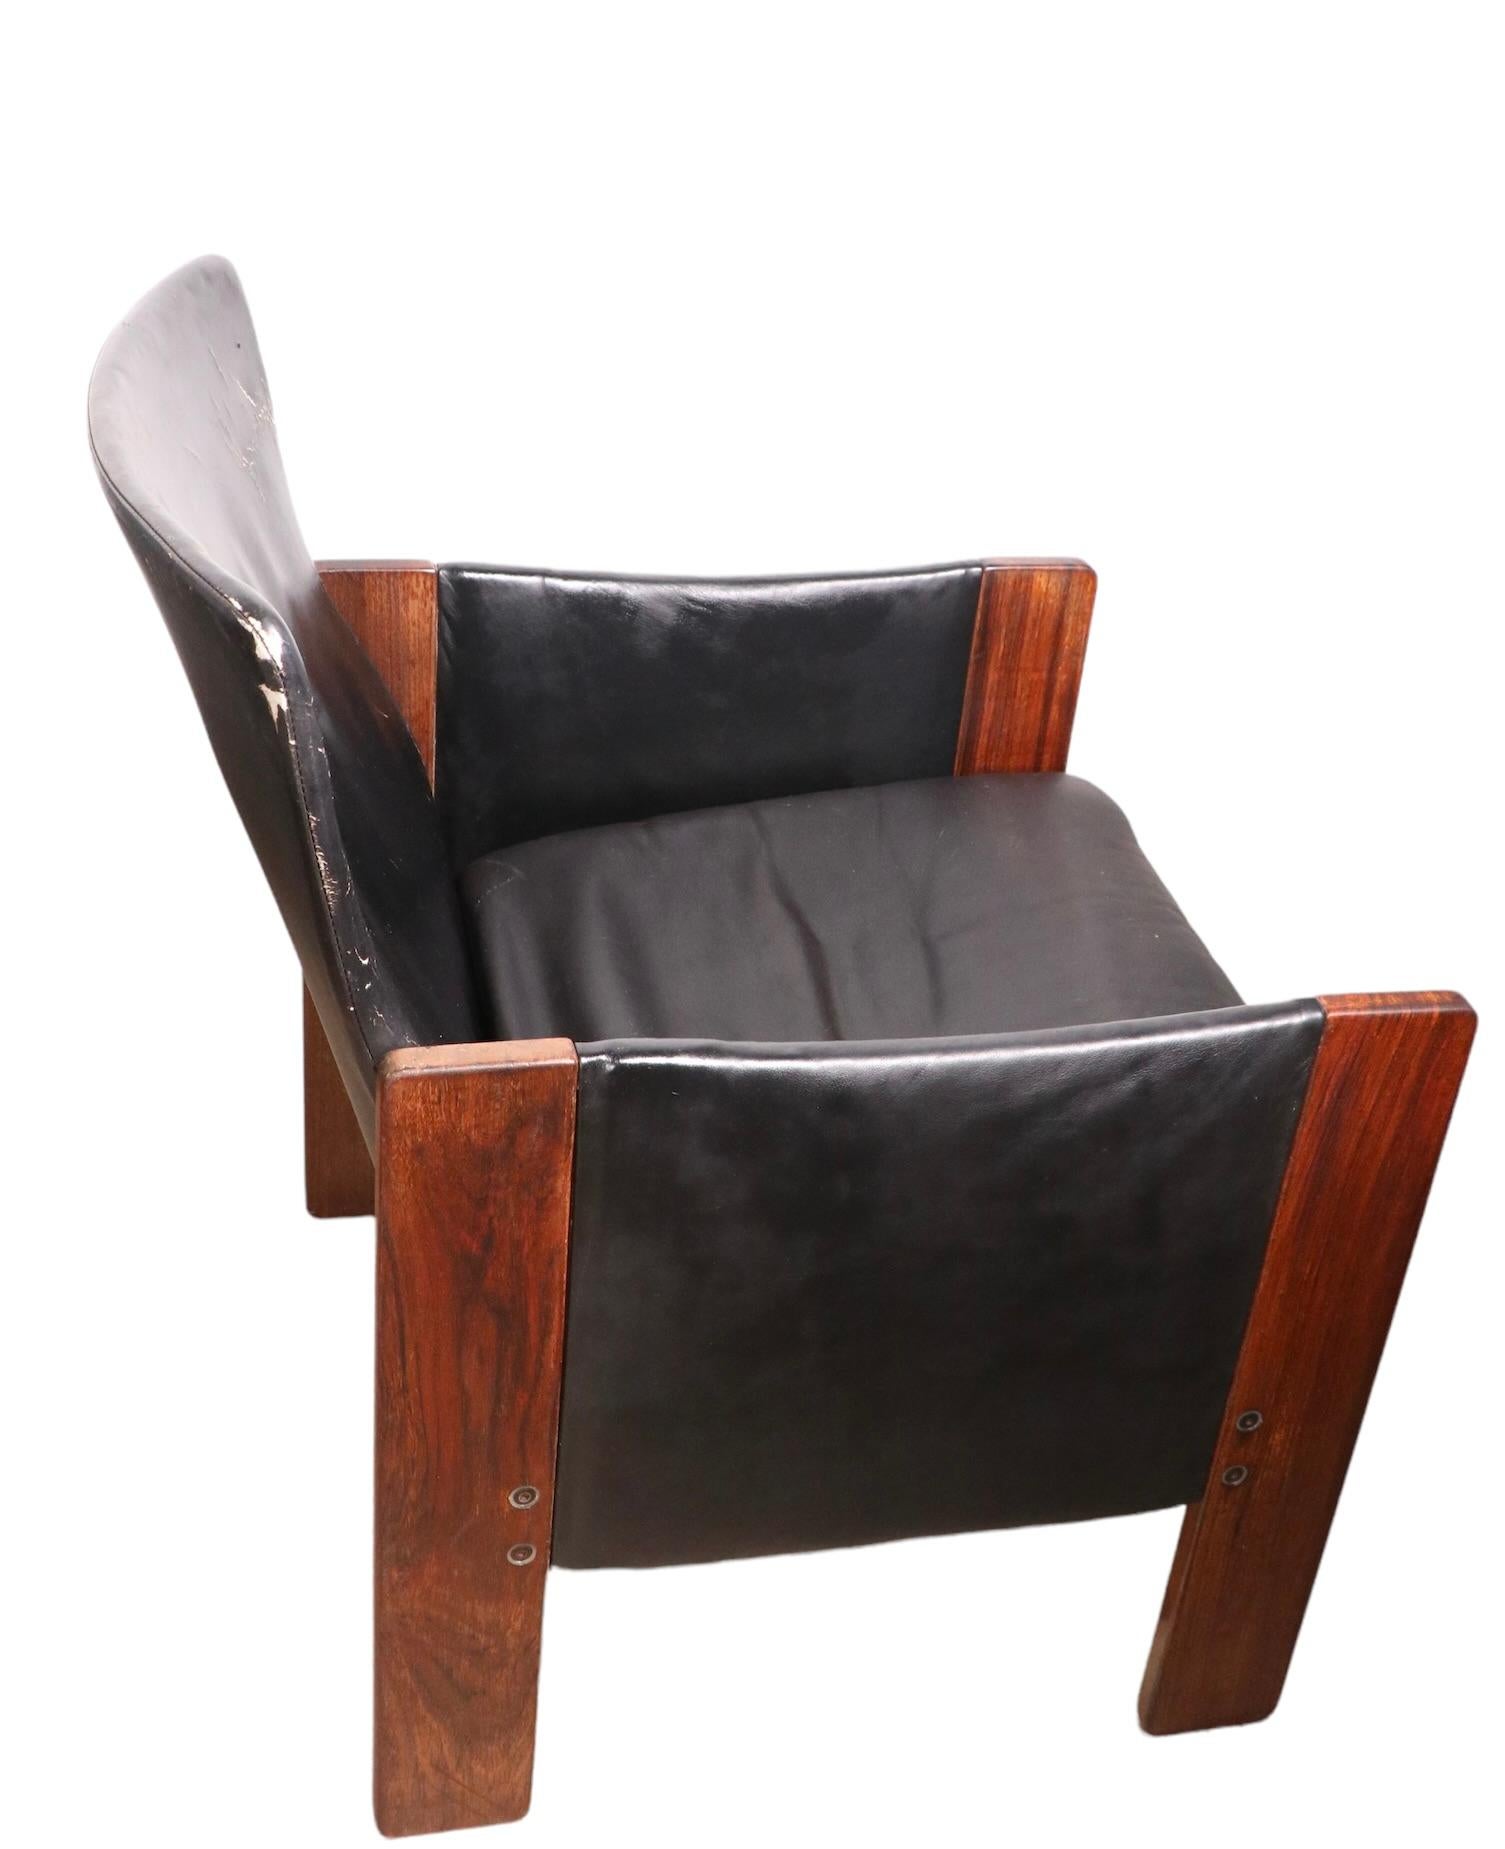 Pr. Rosewood and Leather Lounge Arm Chairs by Tobia Scarpa for Cassina For Sale 6